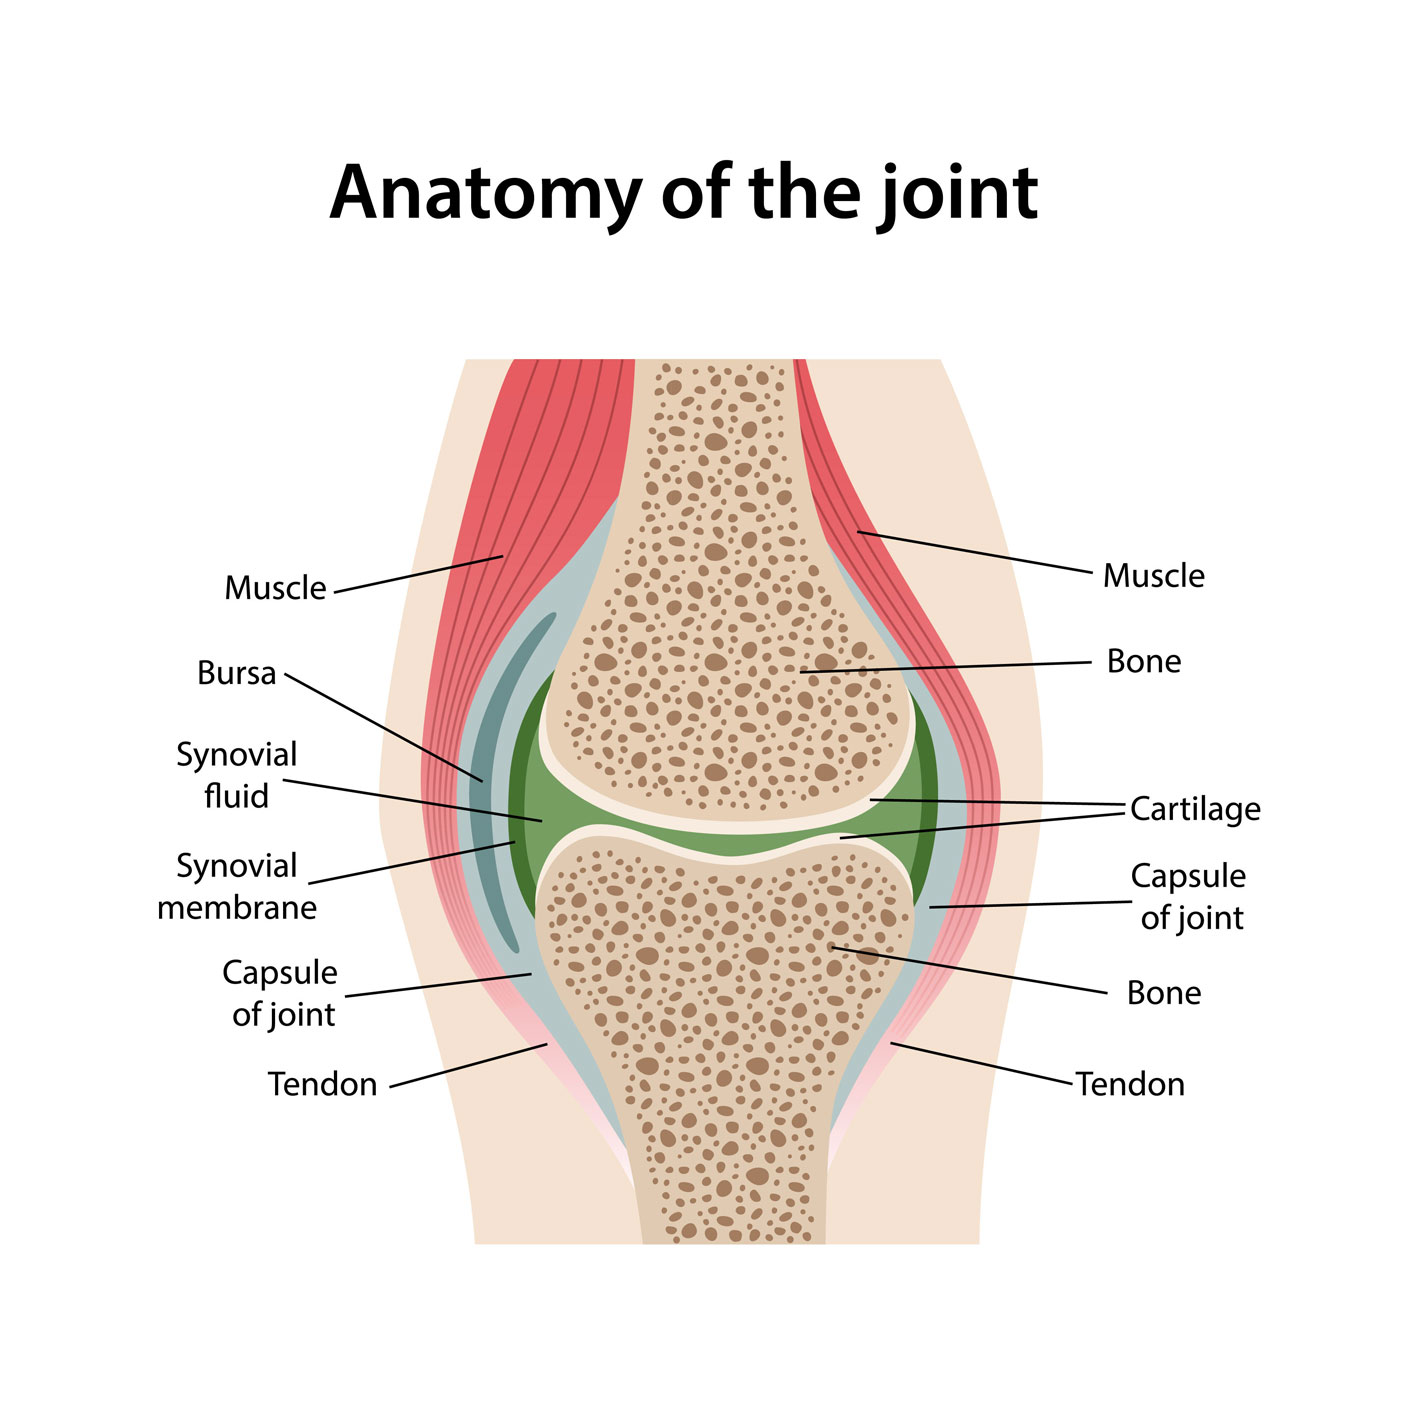 Depiction of joint anatomy: muscle, bursa, synovial fluid, synovial membrane, capsule of joint, tendon.